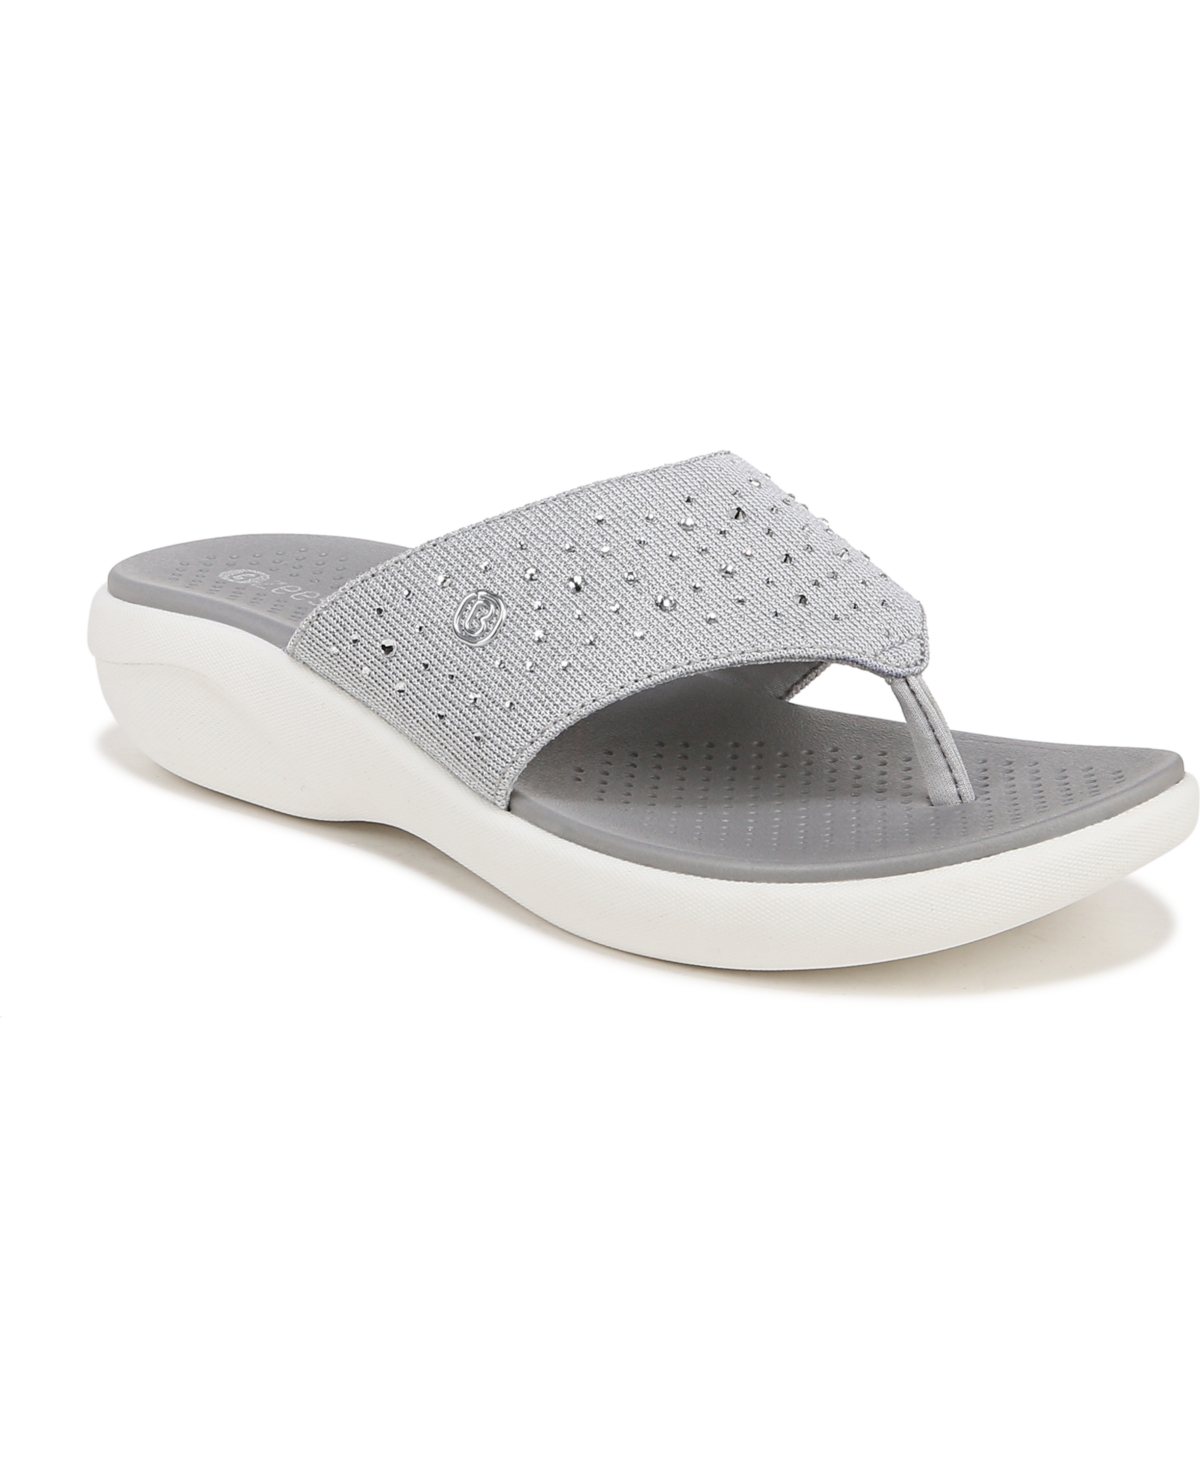 Bzees Cruise Bright Washable Thong Sandals In Oyster White Fabric